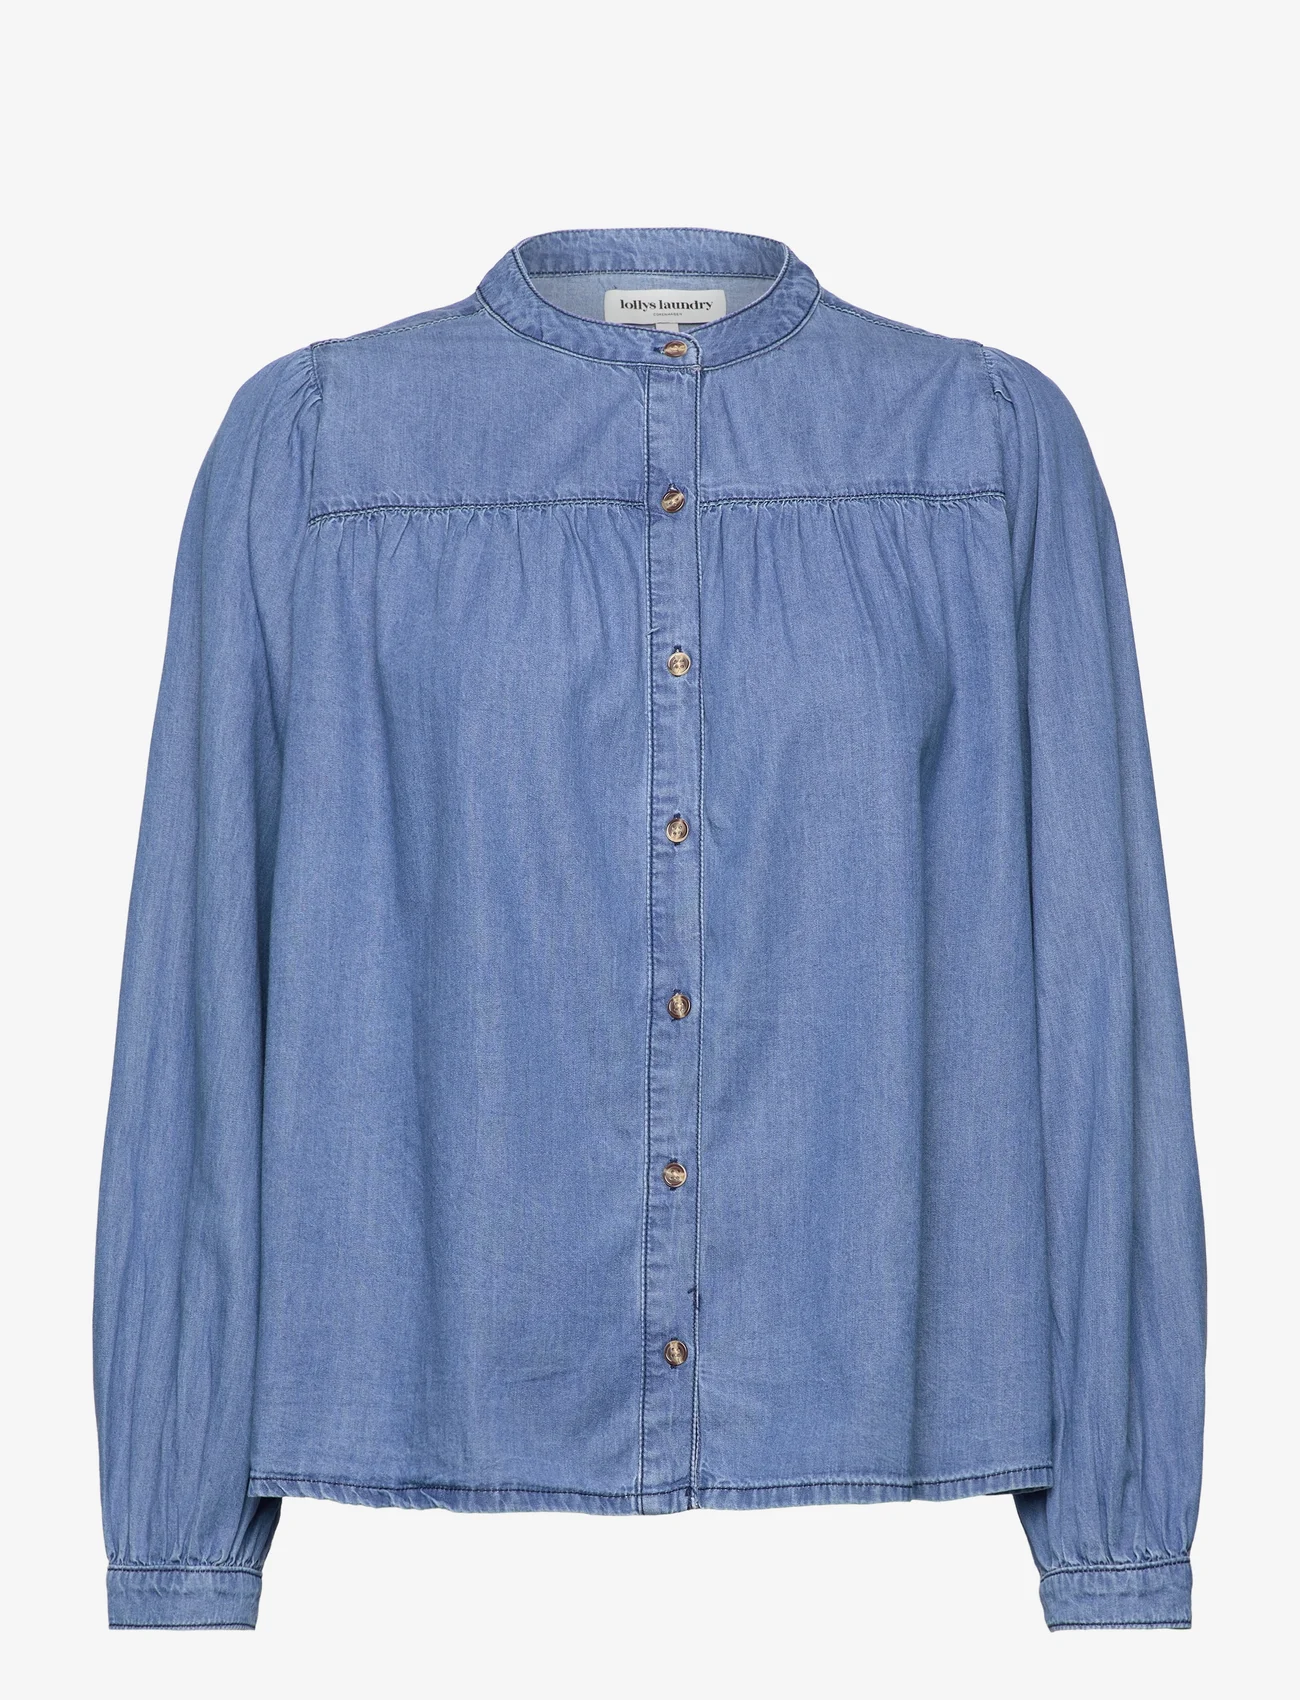 Lollys Laundry - Nicky Shirt - long-sleeved shirts - 20 blue - 0